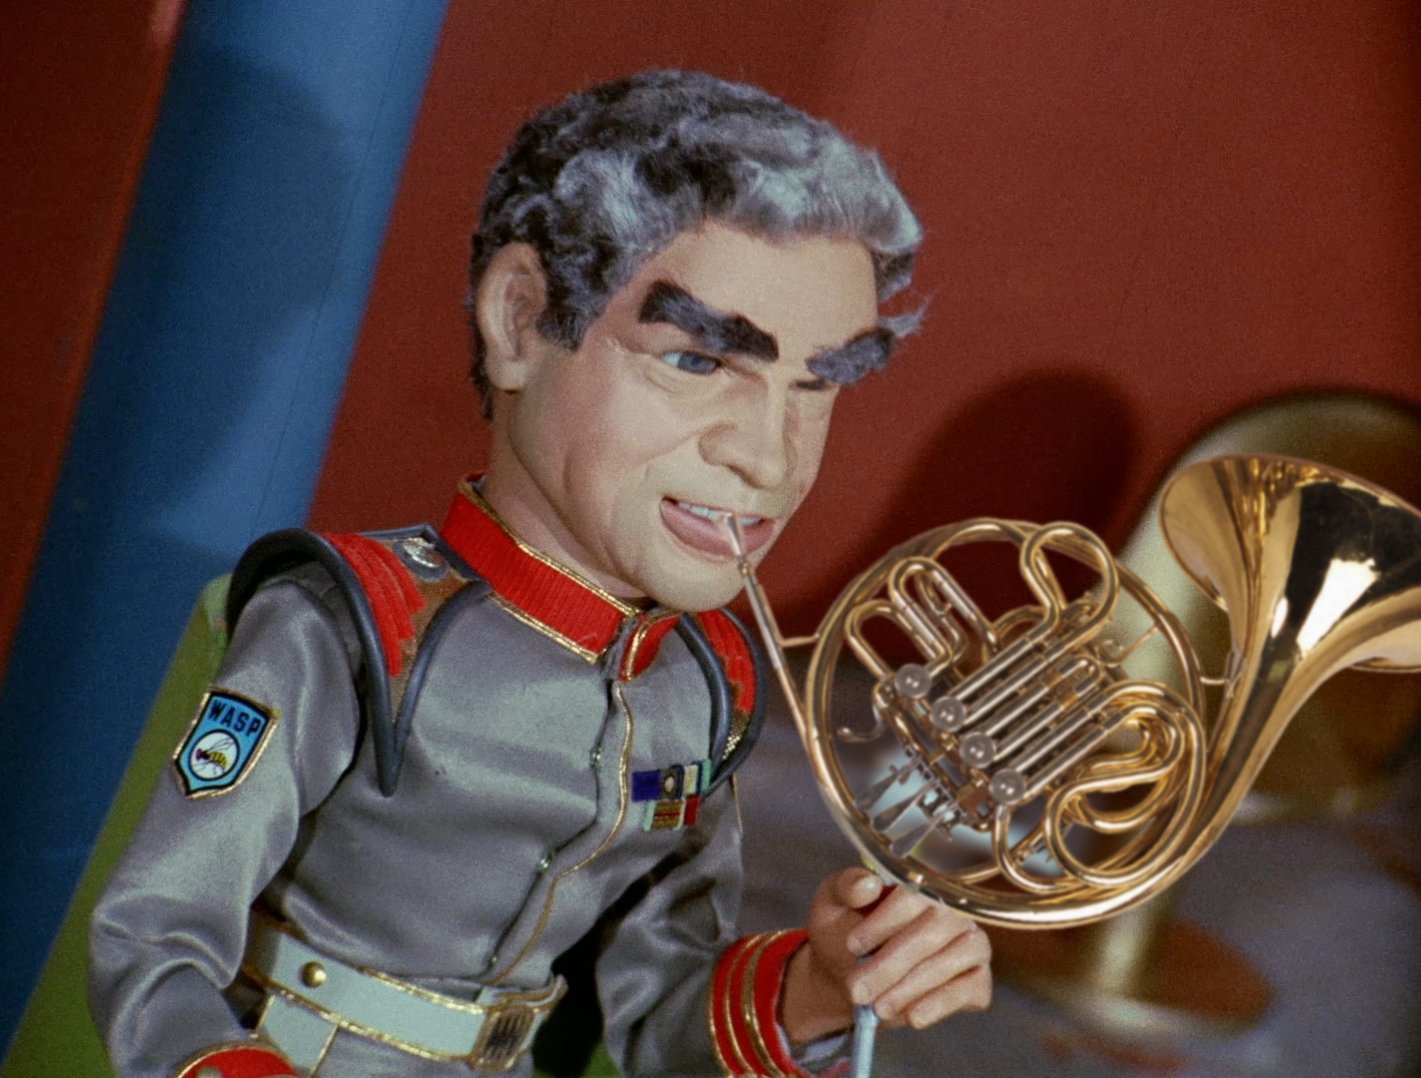 We Are About to Launch the Concert Soundtrack - The Gerry Anderson Store